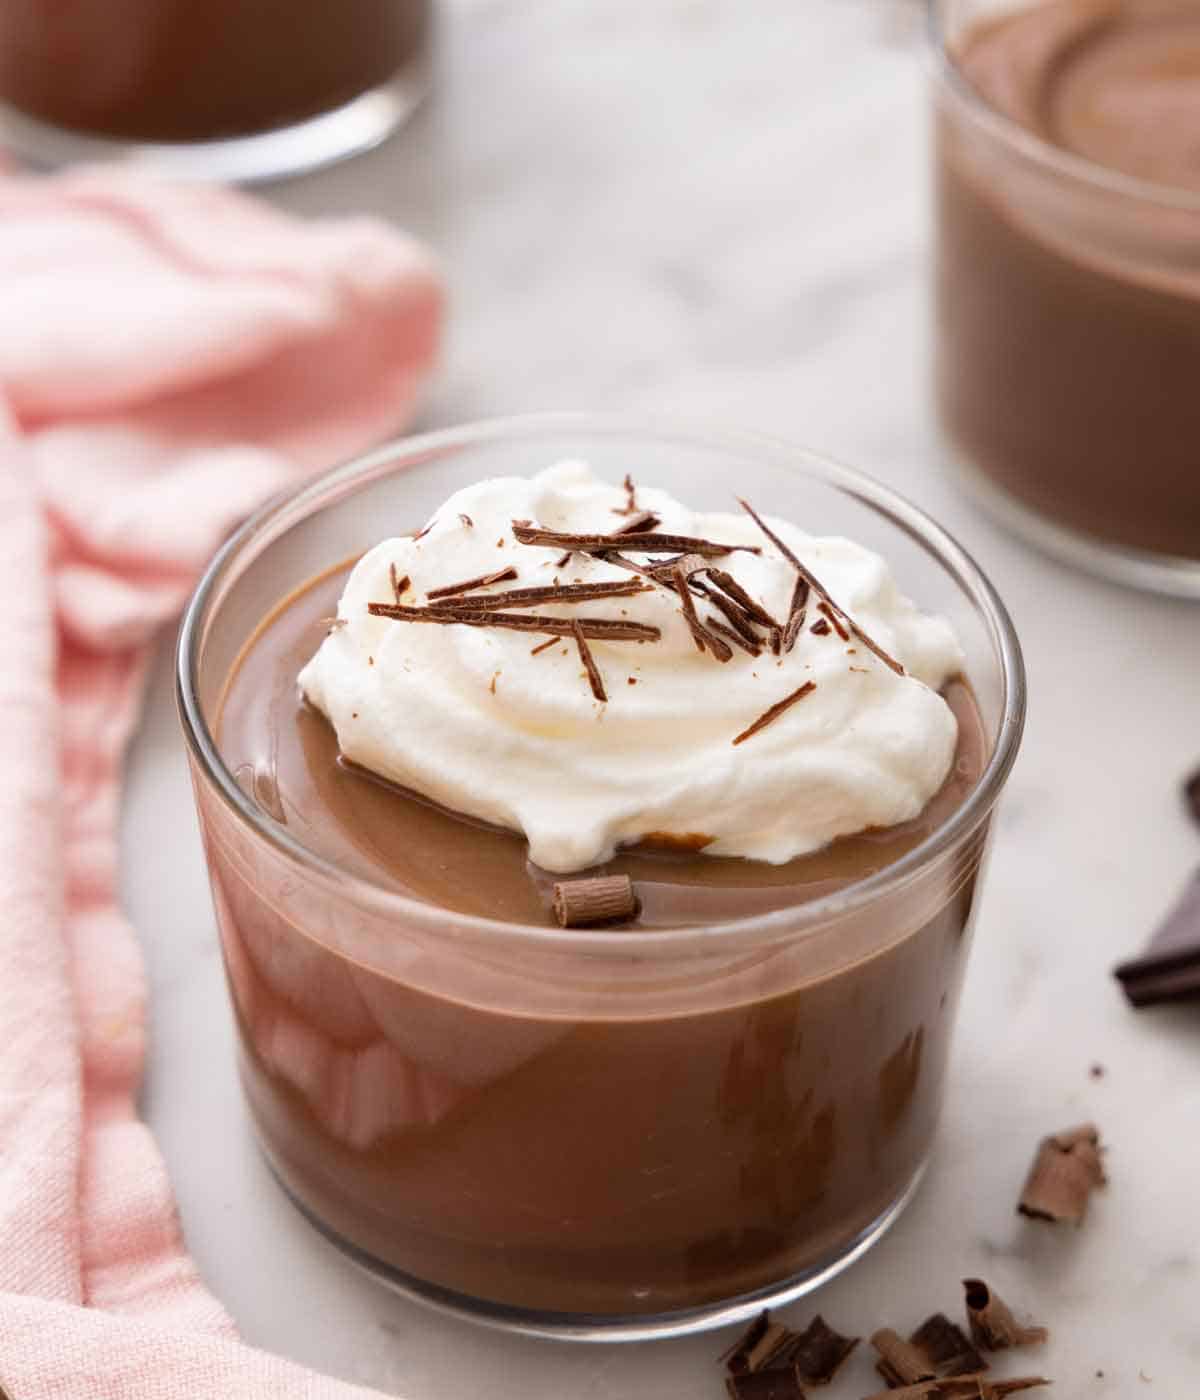 A glass of chocolate pudding with whipped cream on top with shaved chocolate sprinkled on top. Bits of chocolate curls scattered around.